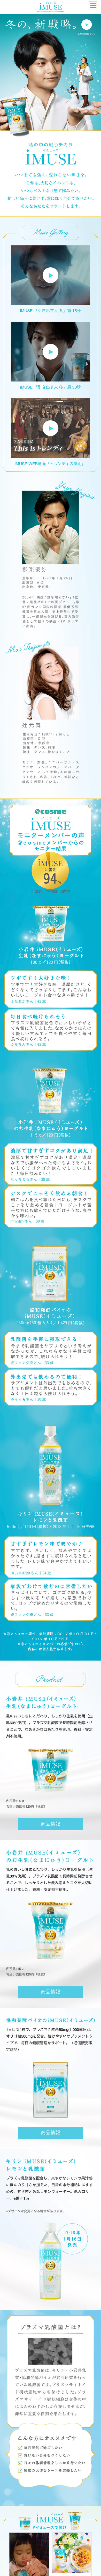 iMUSE_sp_1